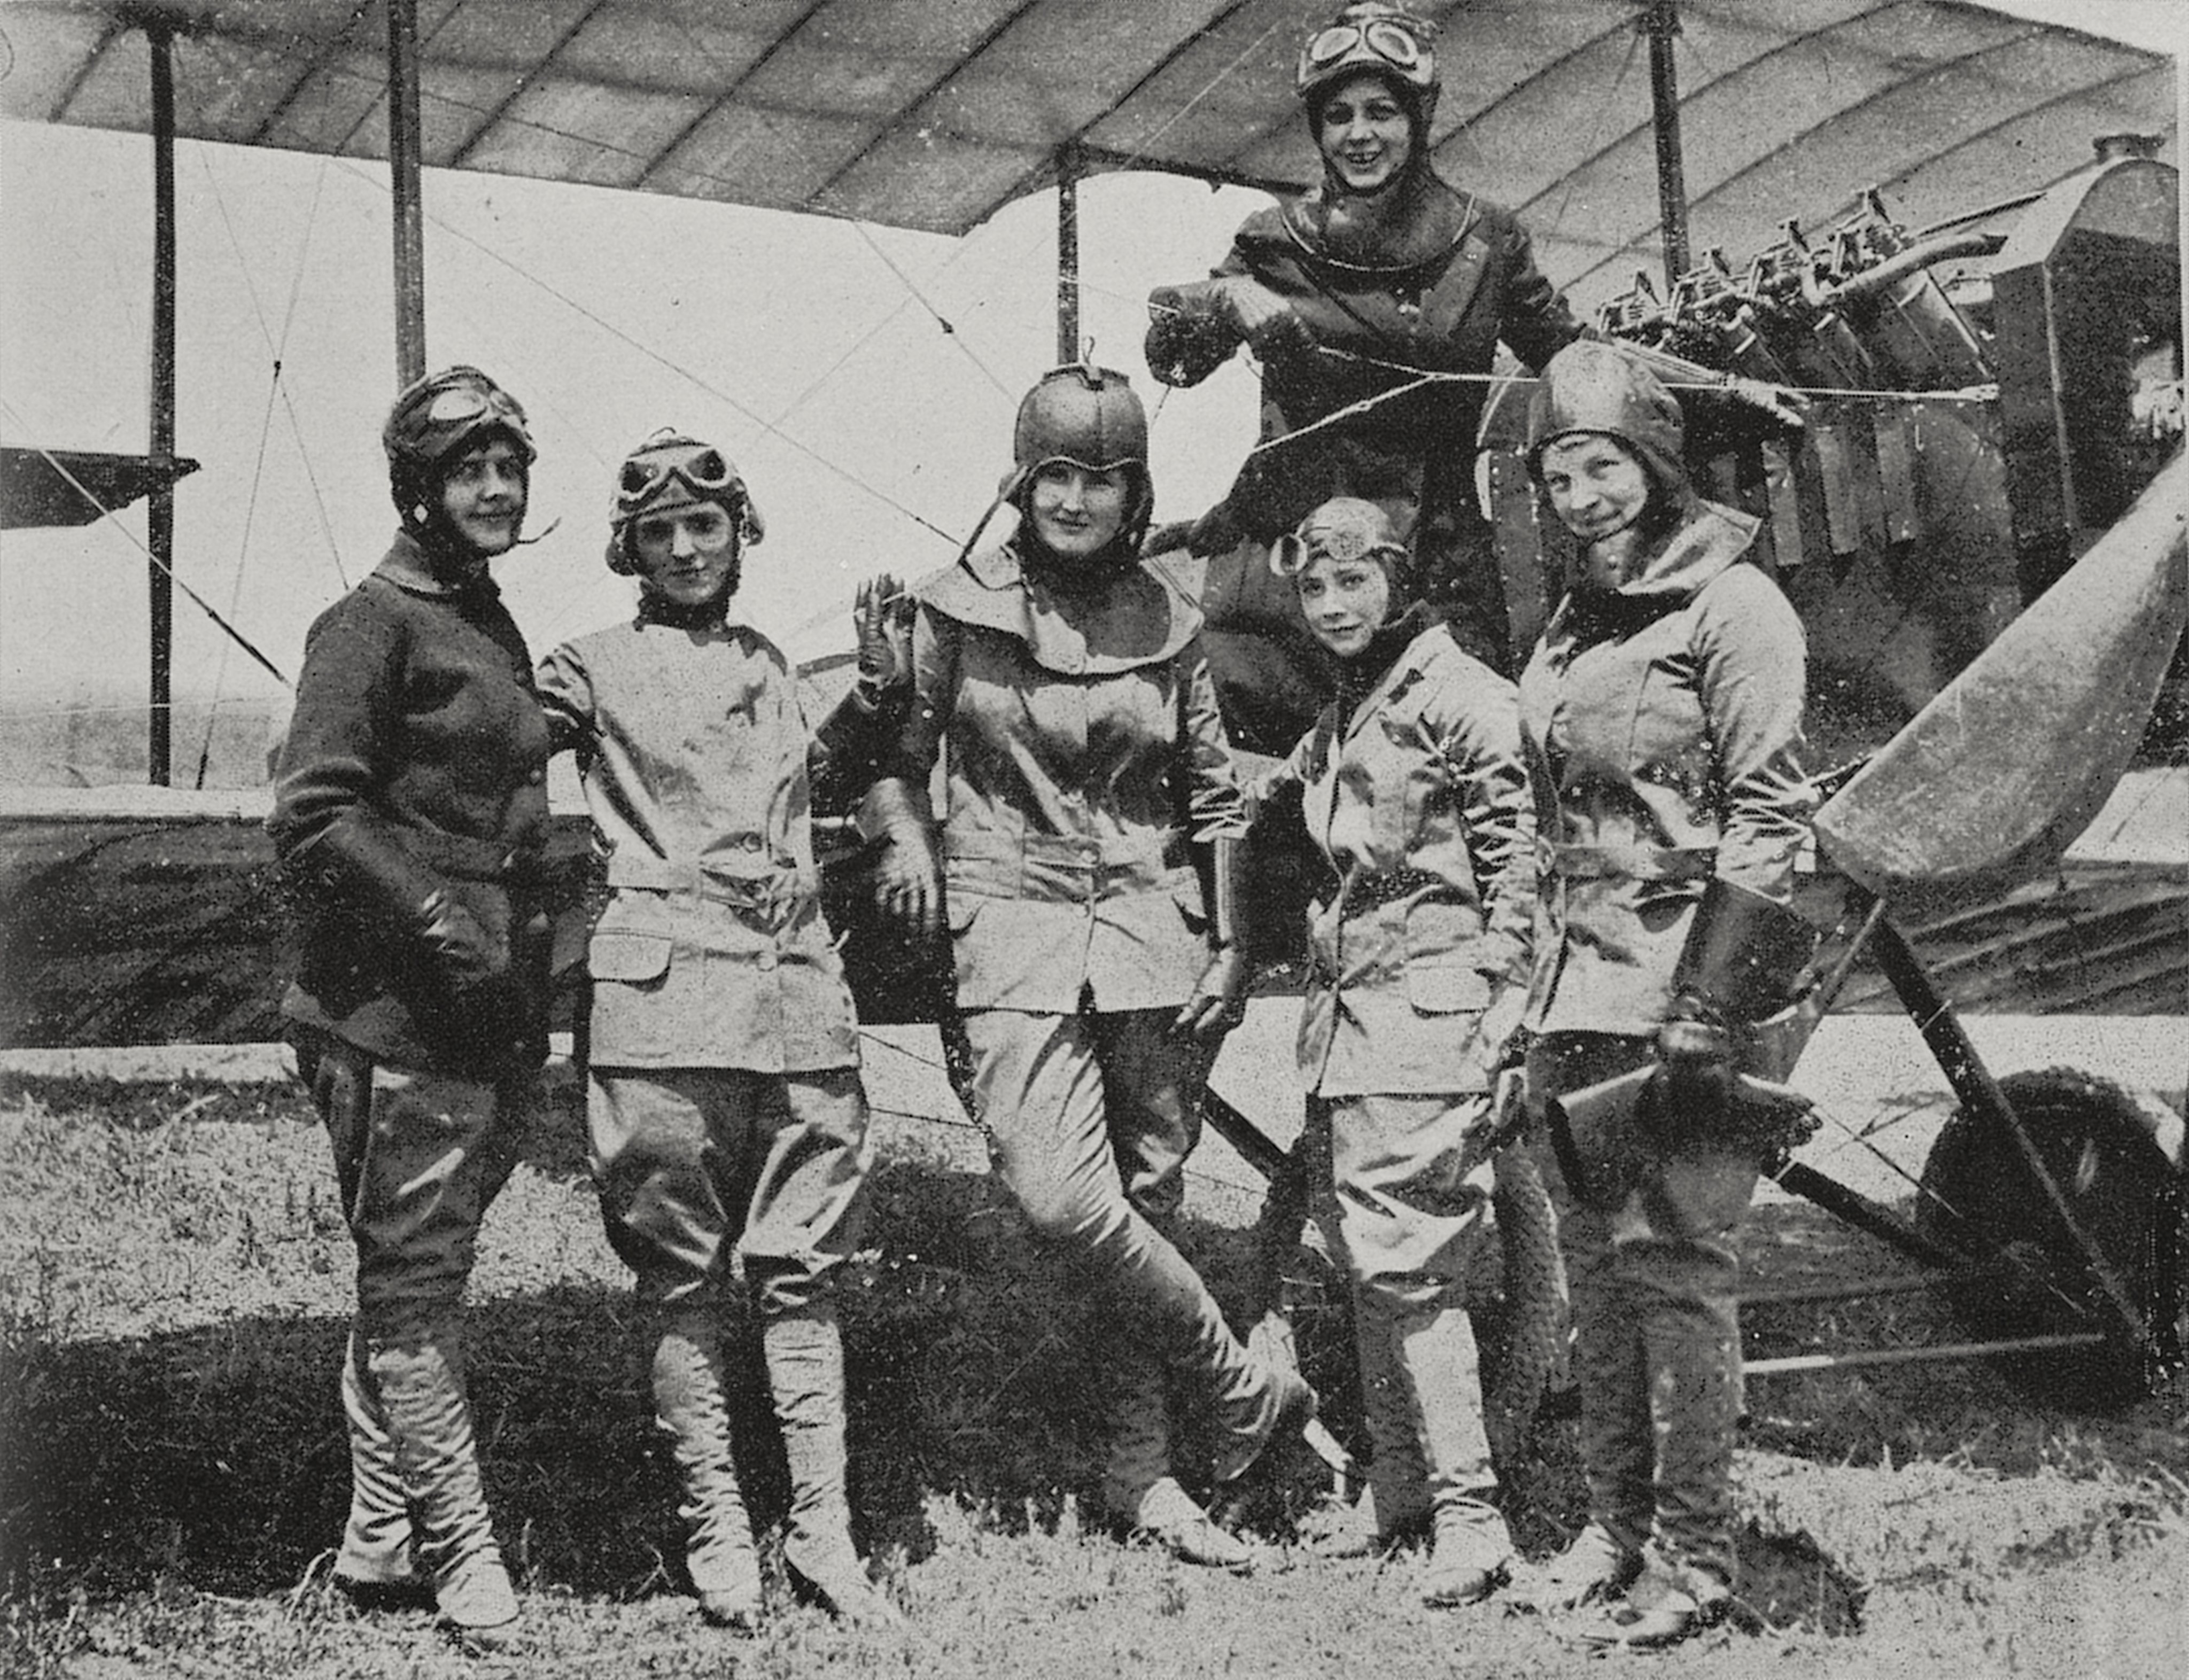 Women enlisted in air force, World War I